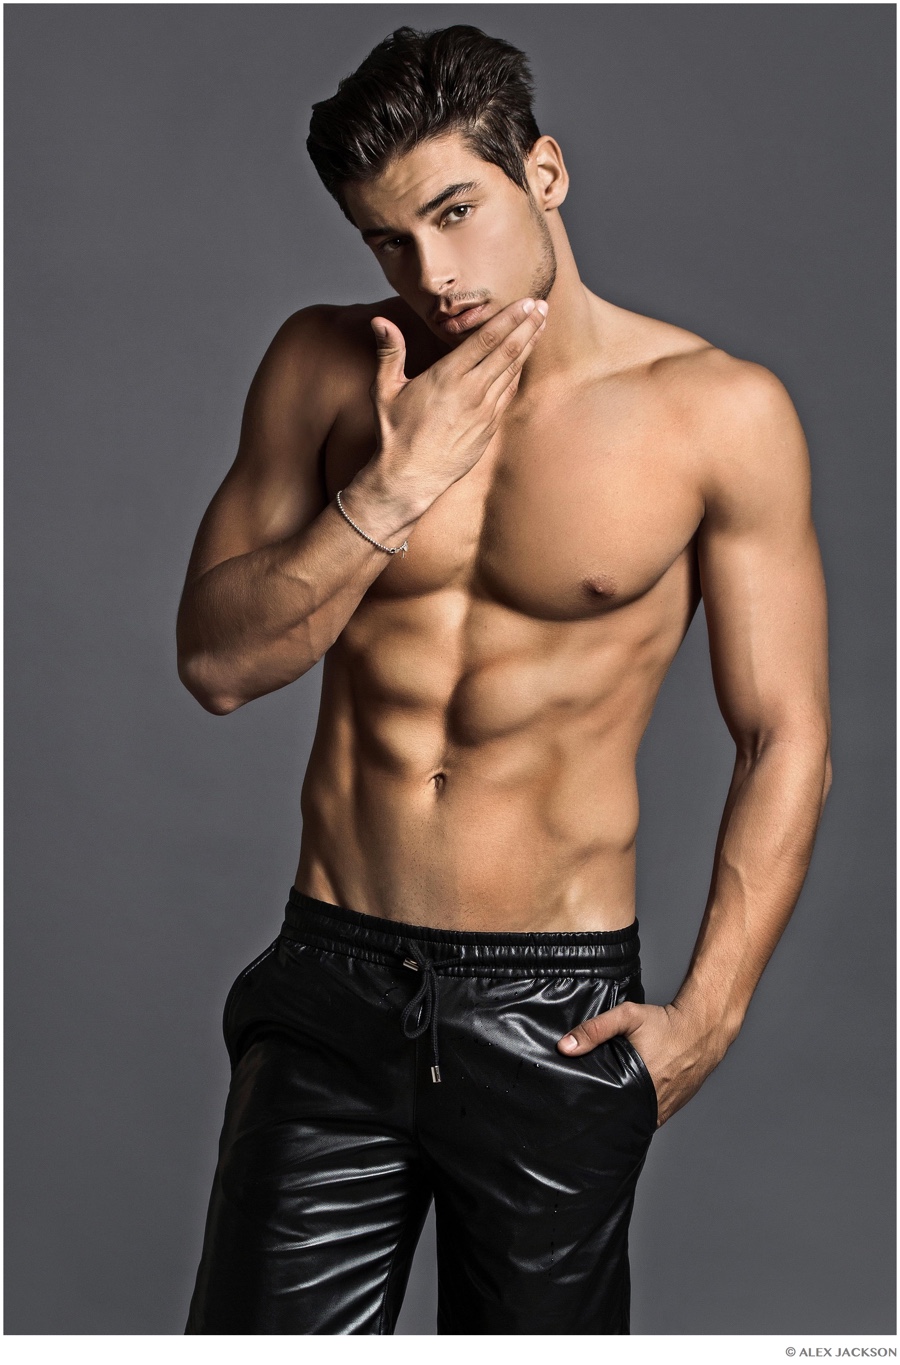 Andrea Denver Poses for Sporty Images by Alex Jackson – The Fashionisto